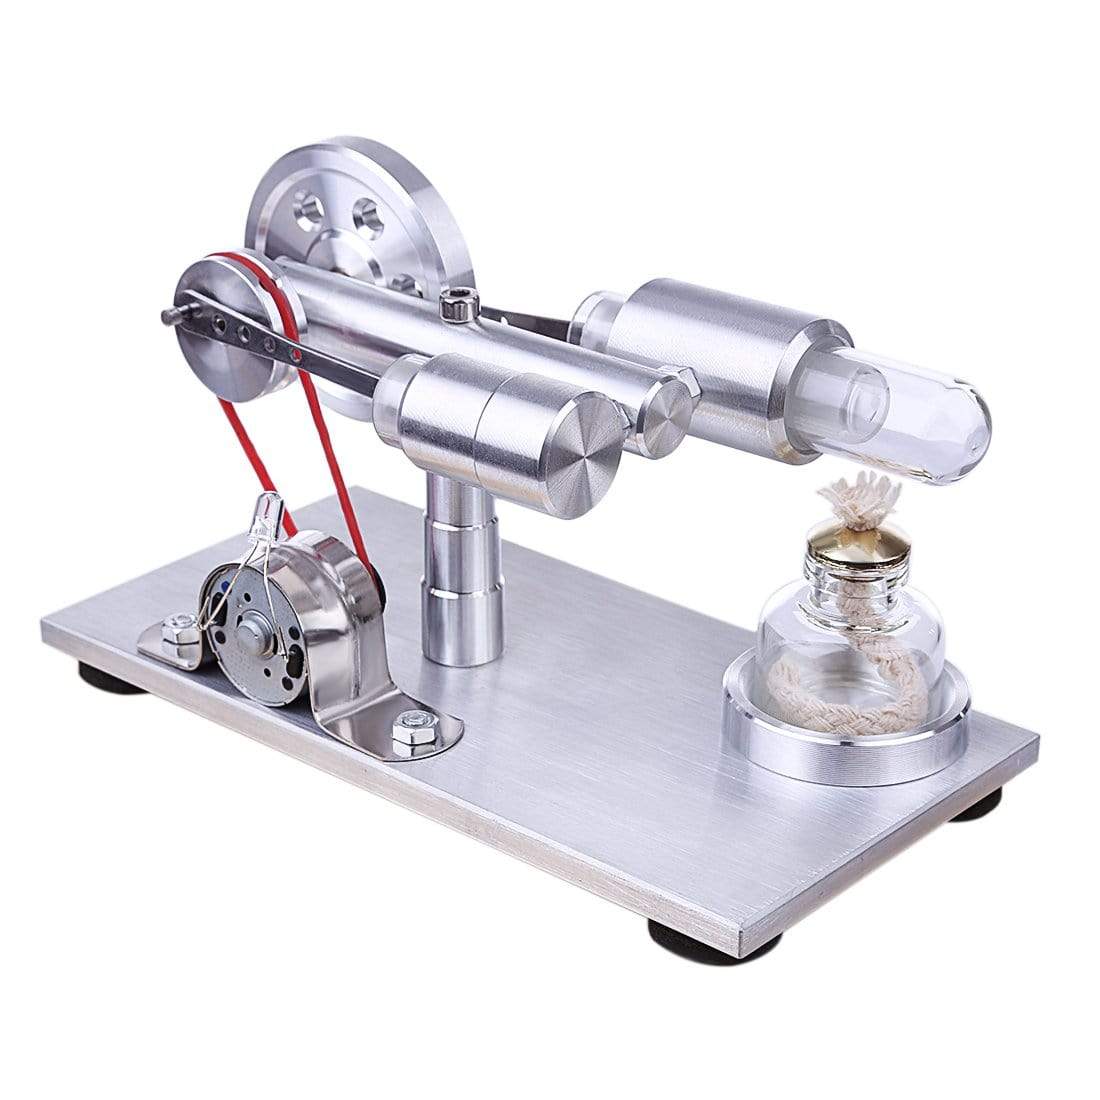 Hot Air Stirling Engine Model Toy Physics Education Air-cooled Generator Motor 